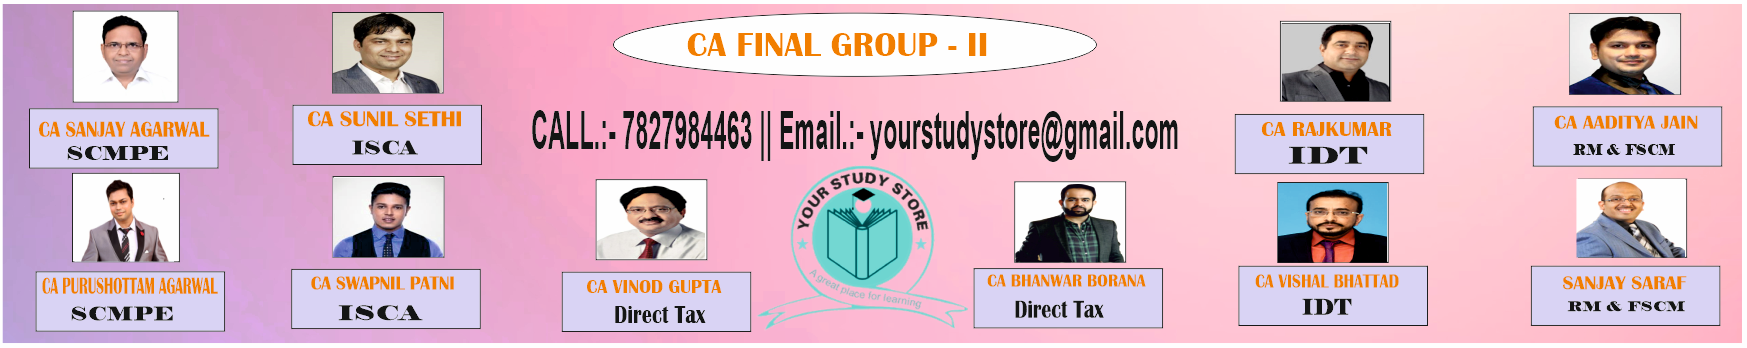 yourstudystore-s-1